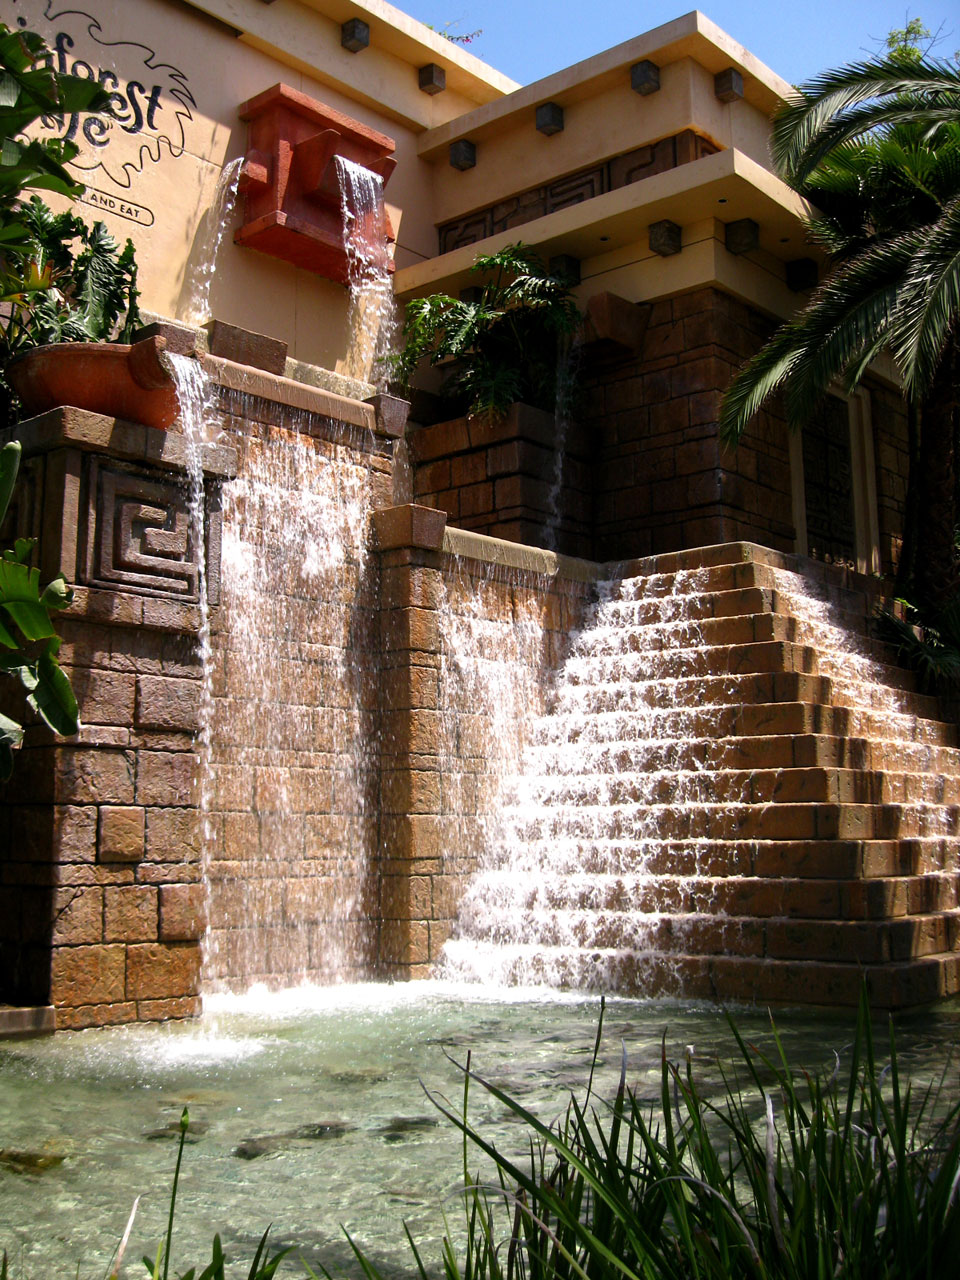 Like a Mayan temple with fountains and waterfalls - Rainforest Cafe in Downtown Disney, Anaheim, CA